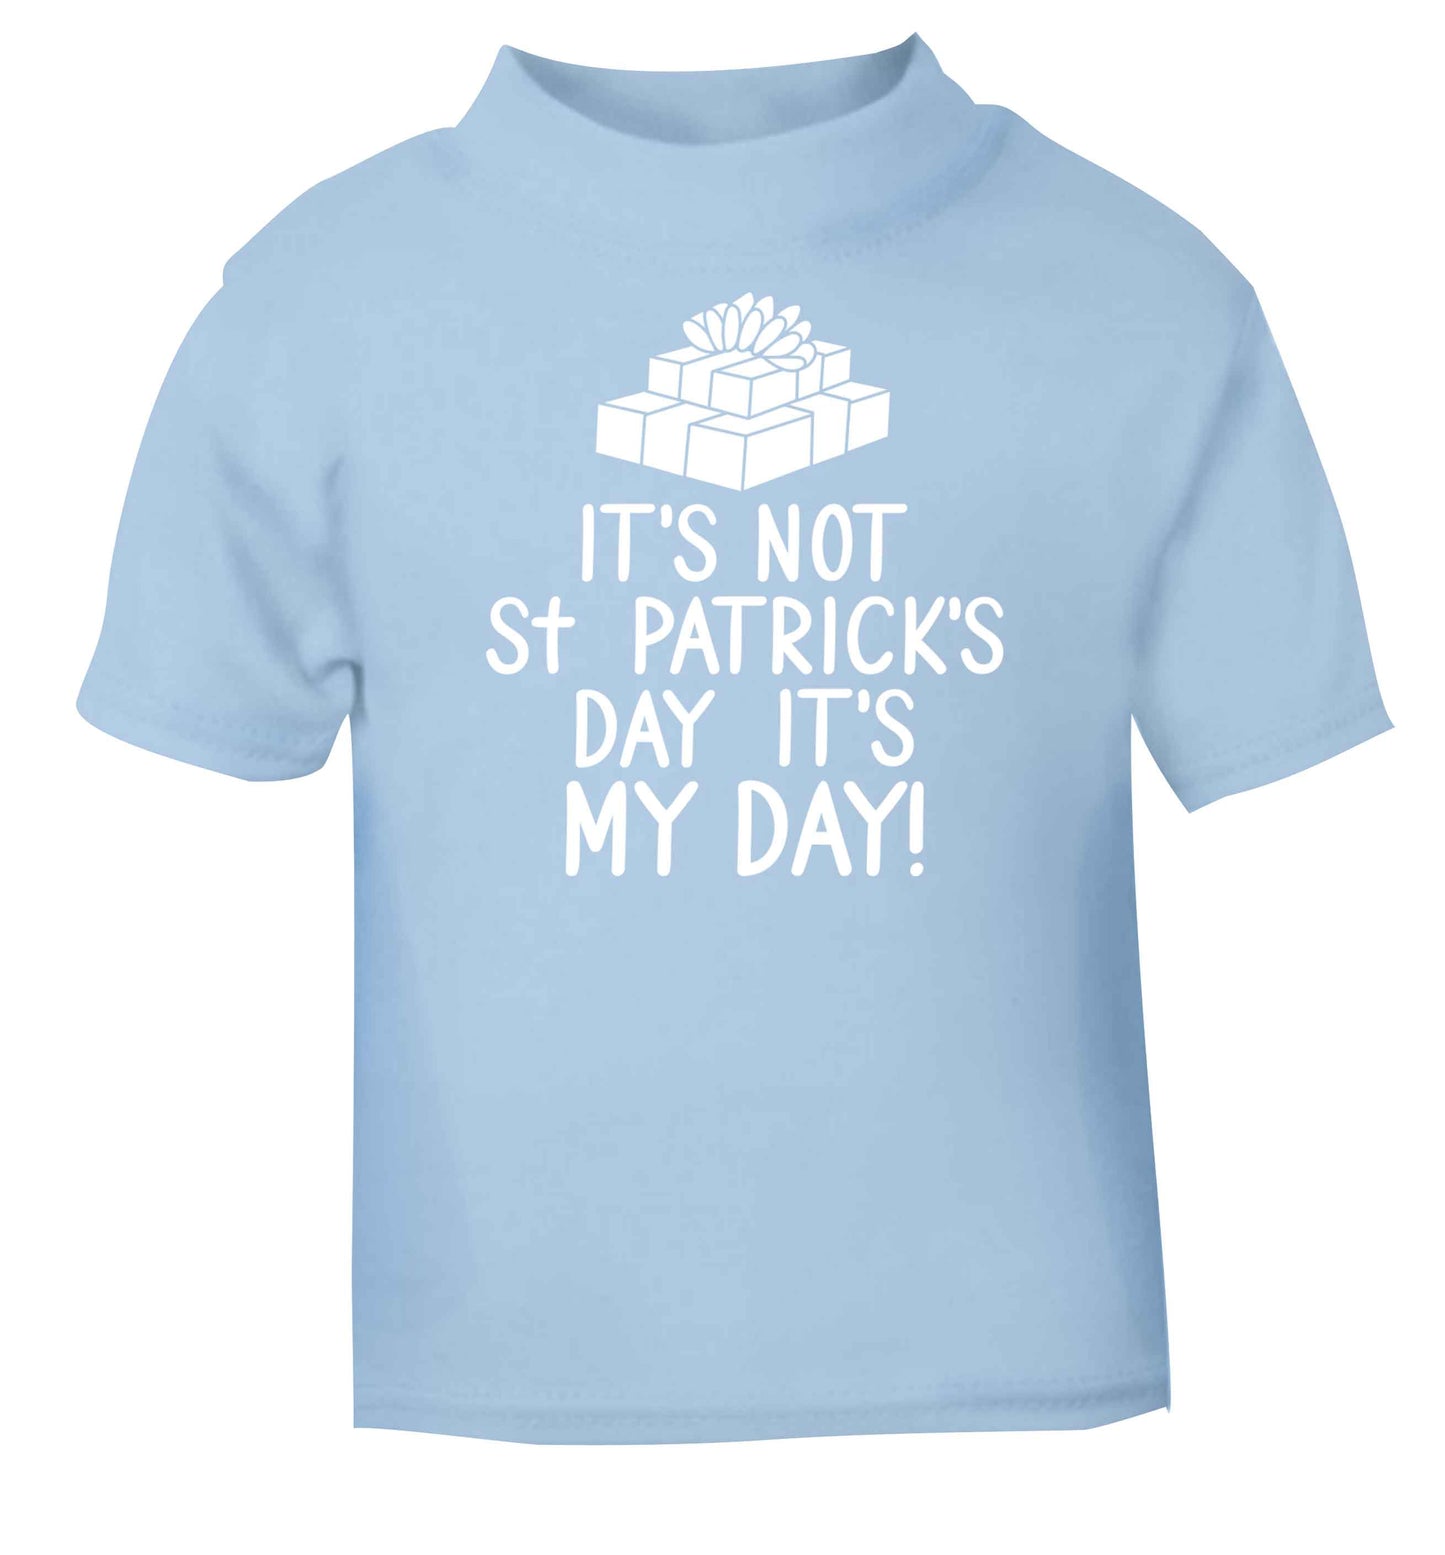 Funny gifts for your mum on mother's dayor her birthday! It's not St Patricks day it's my day light blue baby toddler Tshirt 2 Years